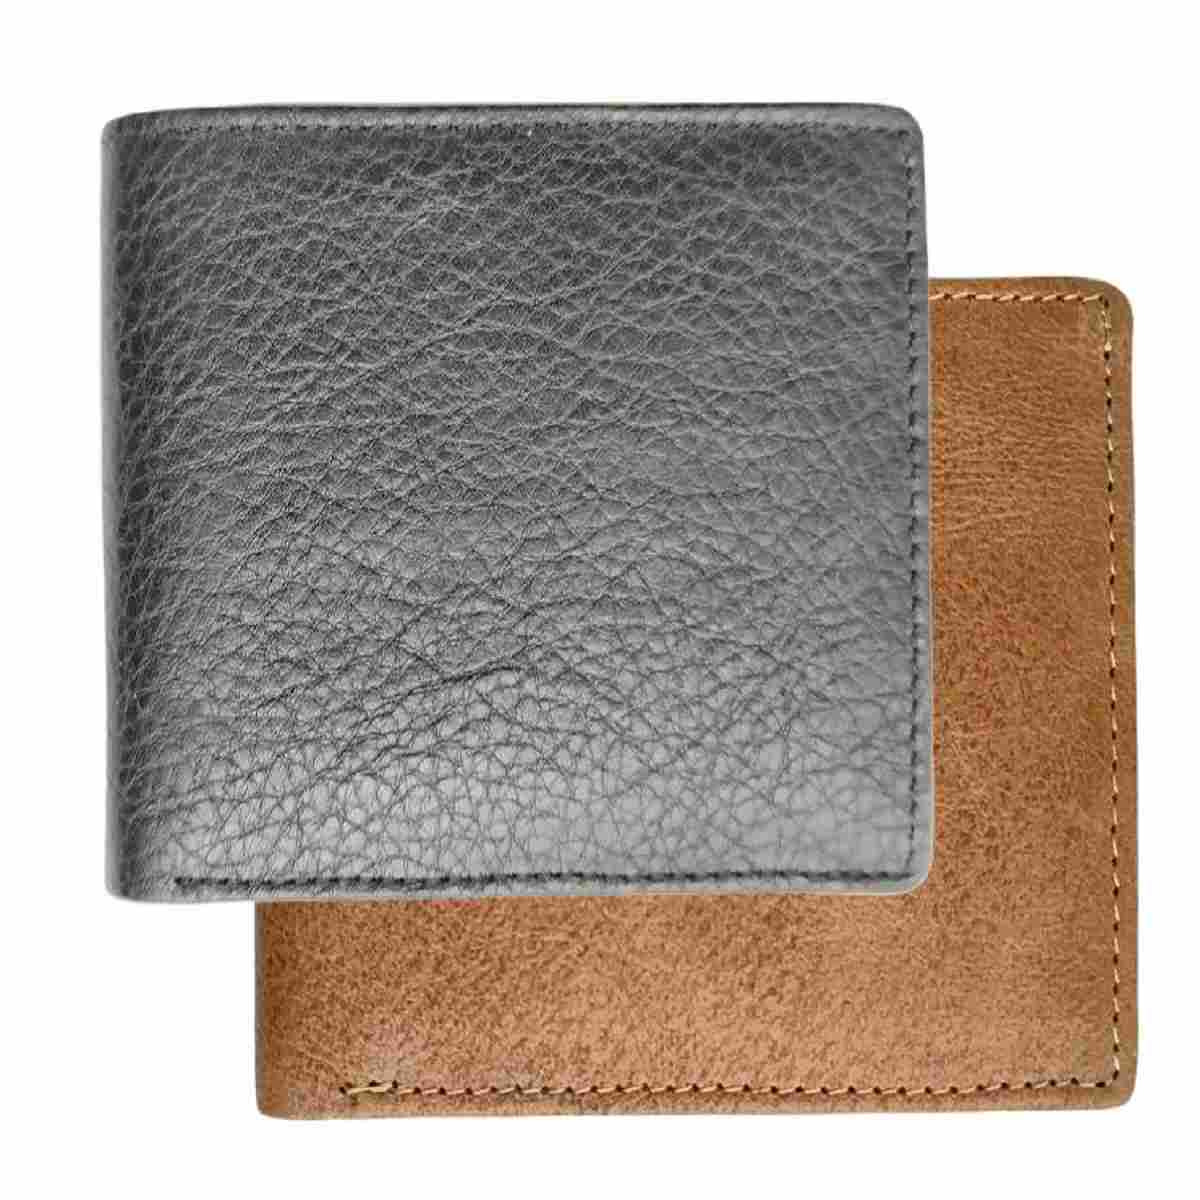 E2017 Genuine Leather Wallets for Men